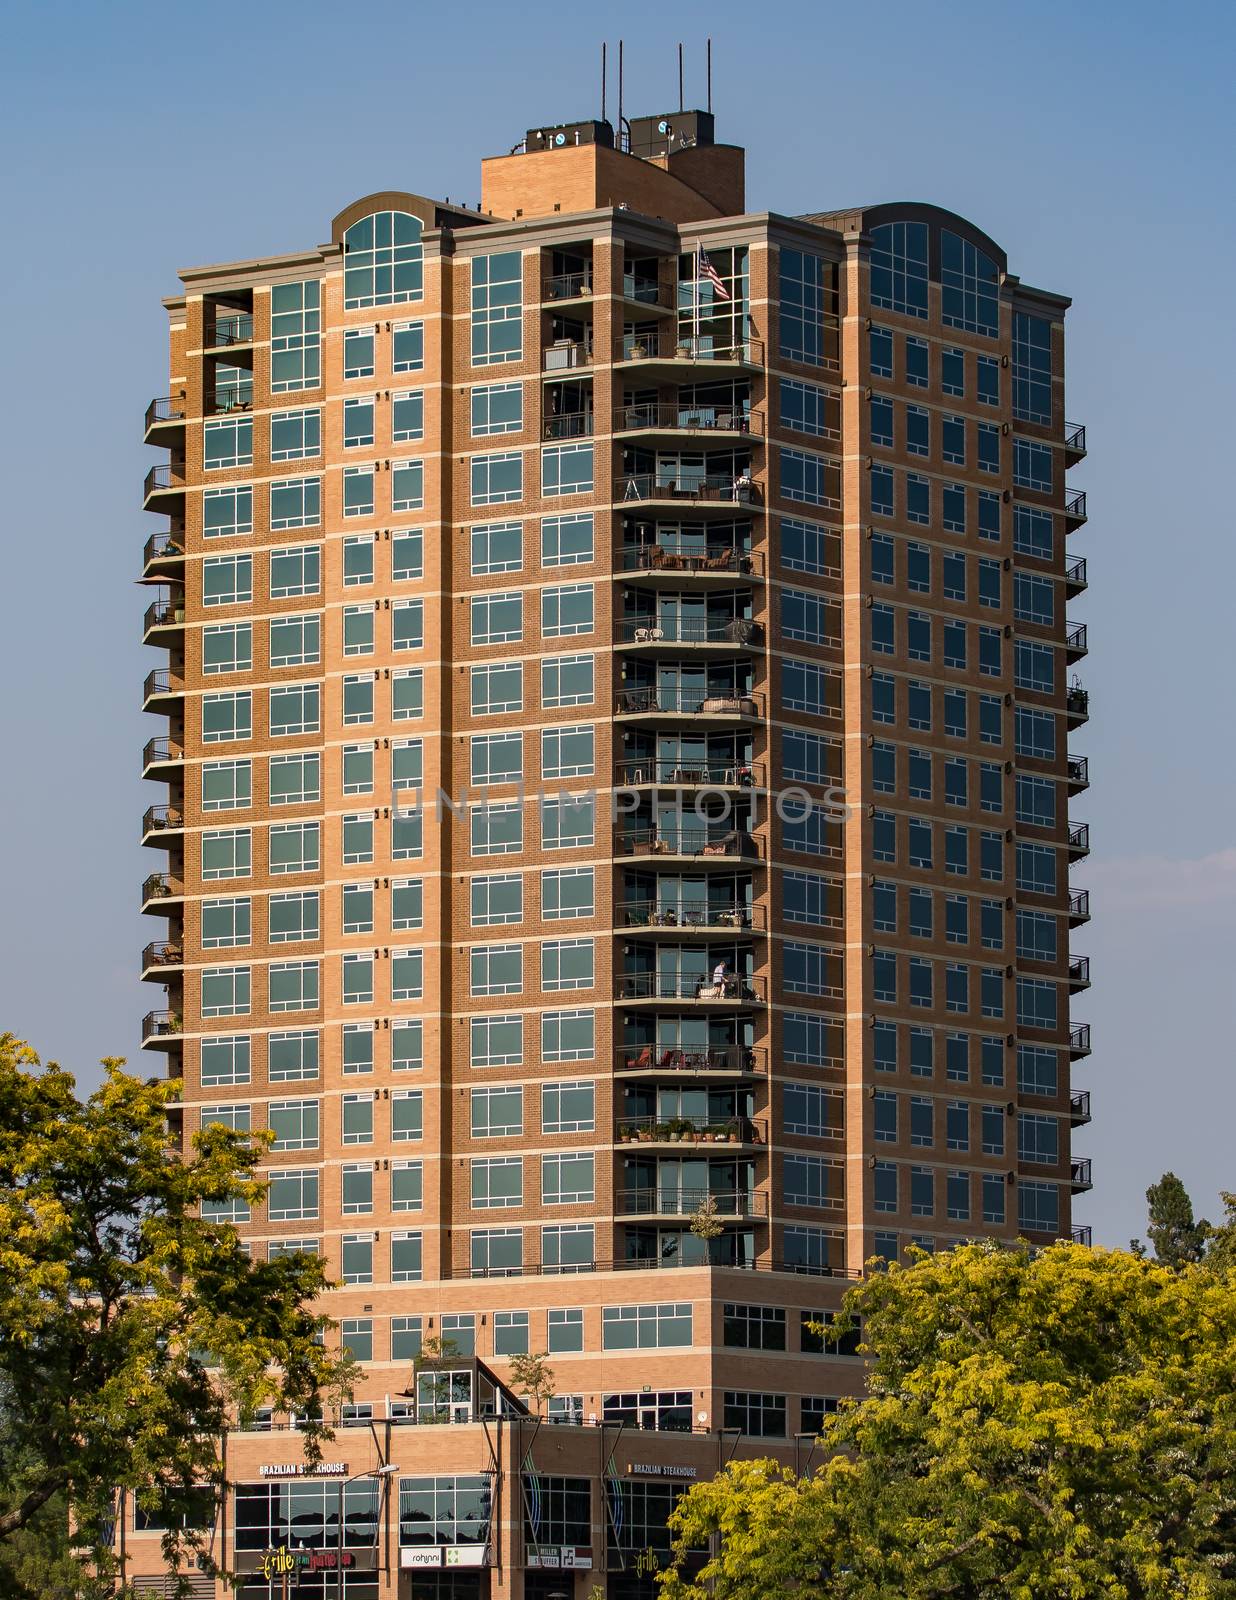 Coeur d'Alene, Idaho, USA-July 9, 2015: A view of a large apartment building and offices in Idaho from LakeCoeur d'Alene during sunset.